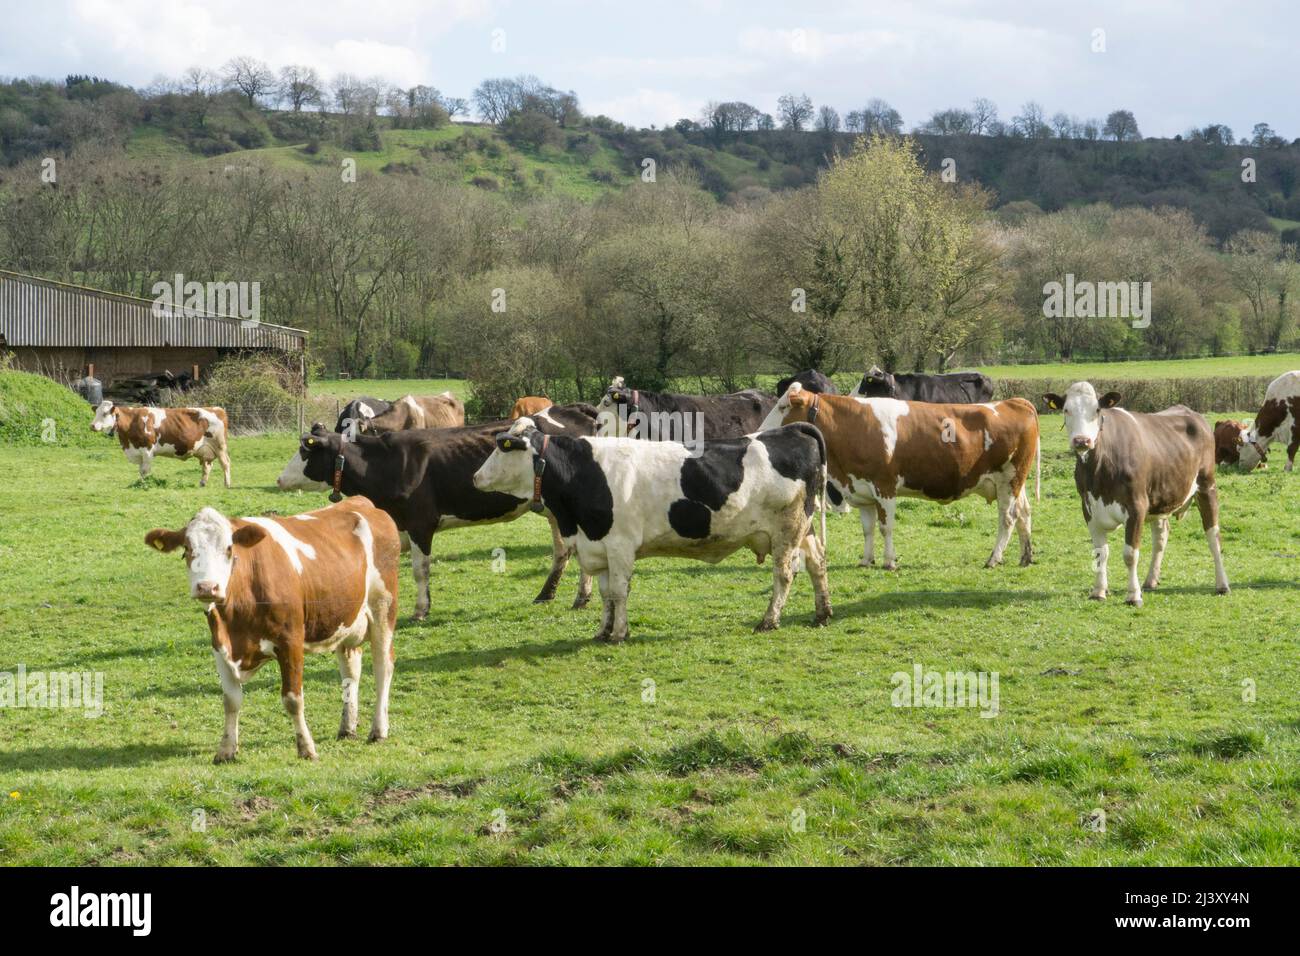 An organic dairy herd of cows on a farm in Wiltshire. Anna Watson/Alamy Stock Photo